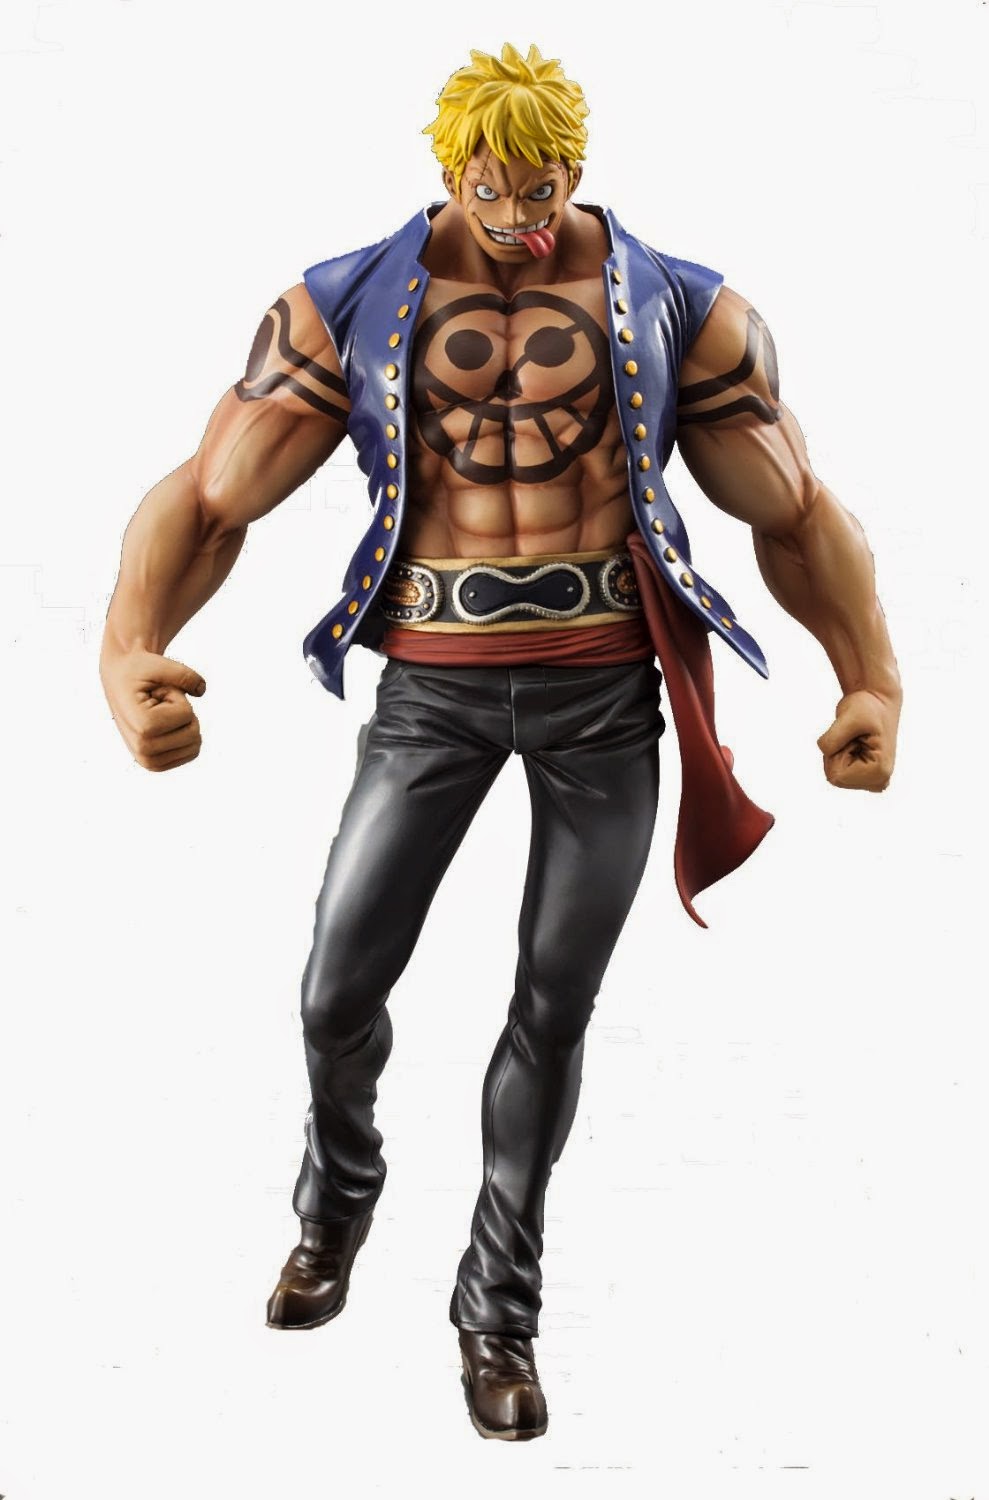 http://www.play-asia.com/excellent-model-portrait-of-pirates-one-piece-sailing-again-bell-paOS-13-49-en-70-7ohr.html?affiliate_id=591227